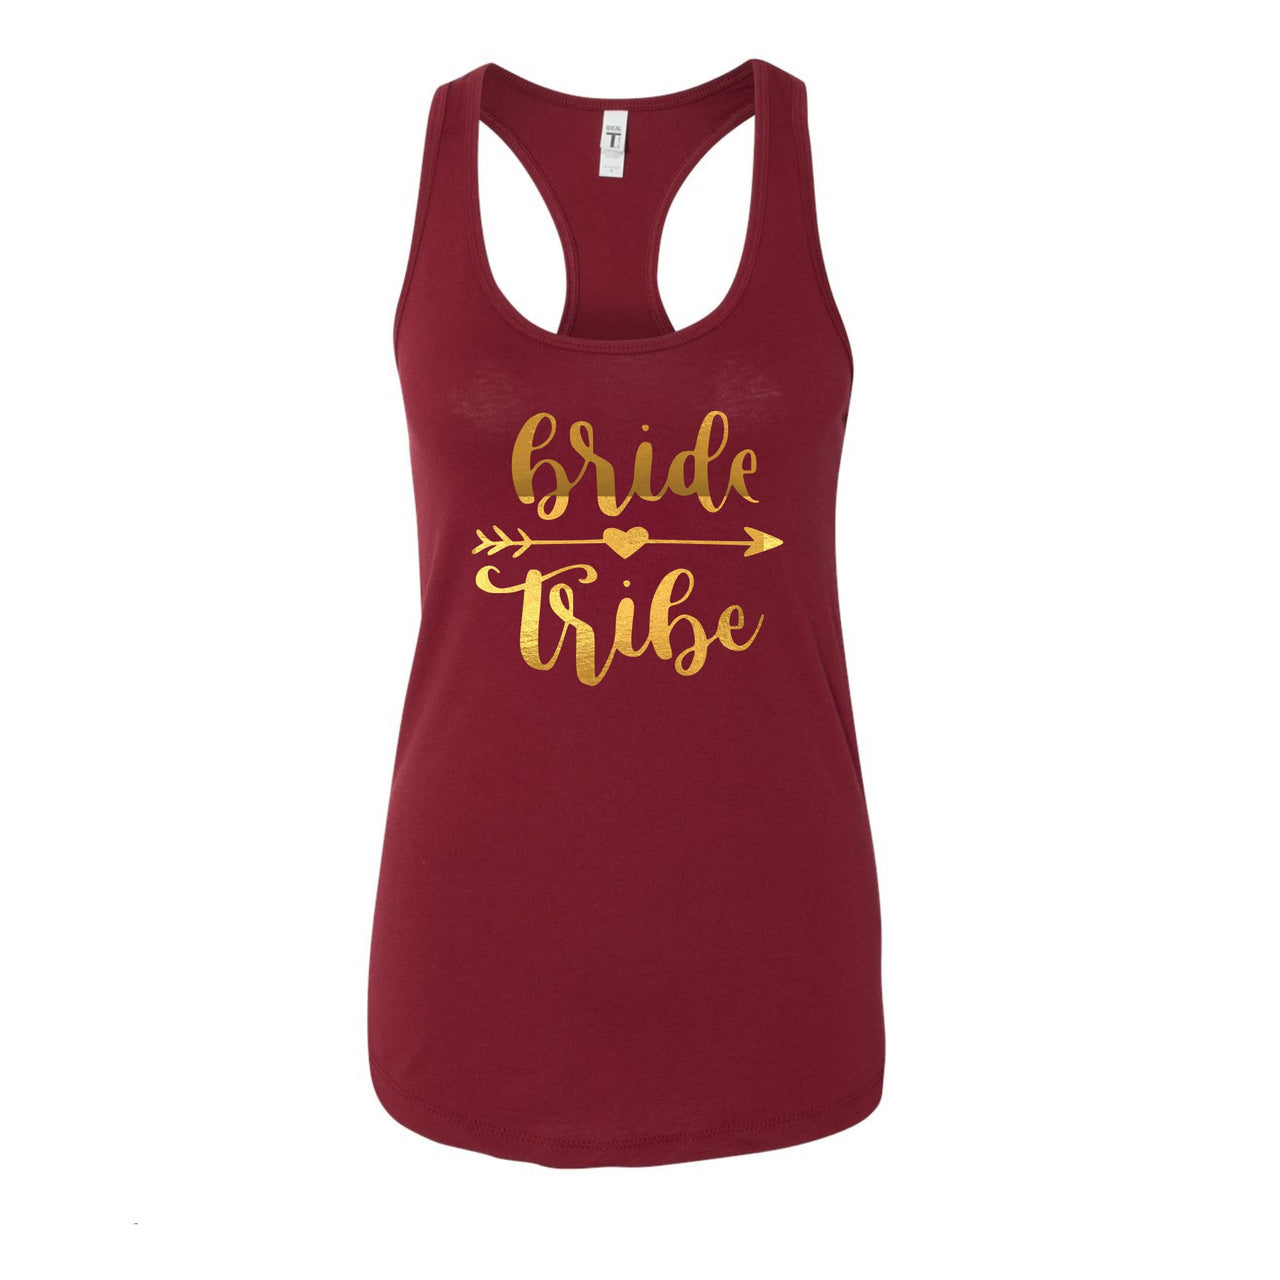 Bride Tribe - Ladies Racerback tank (2 Size XL's Available)